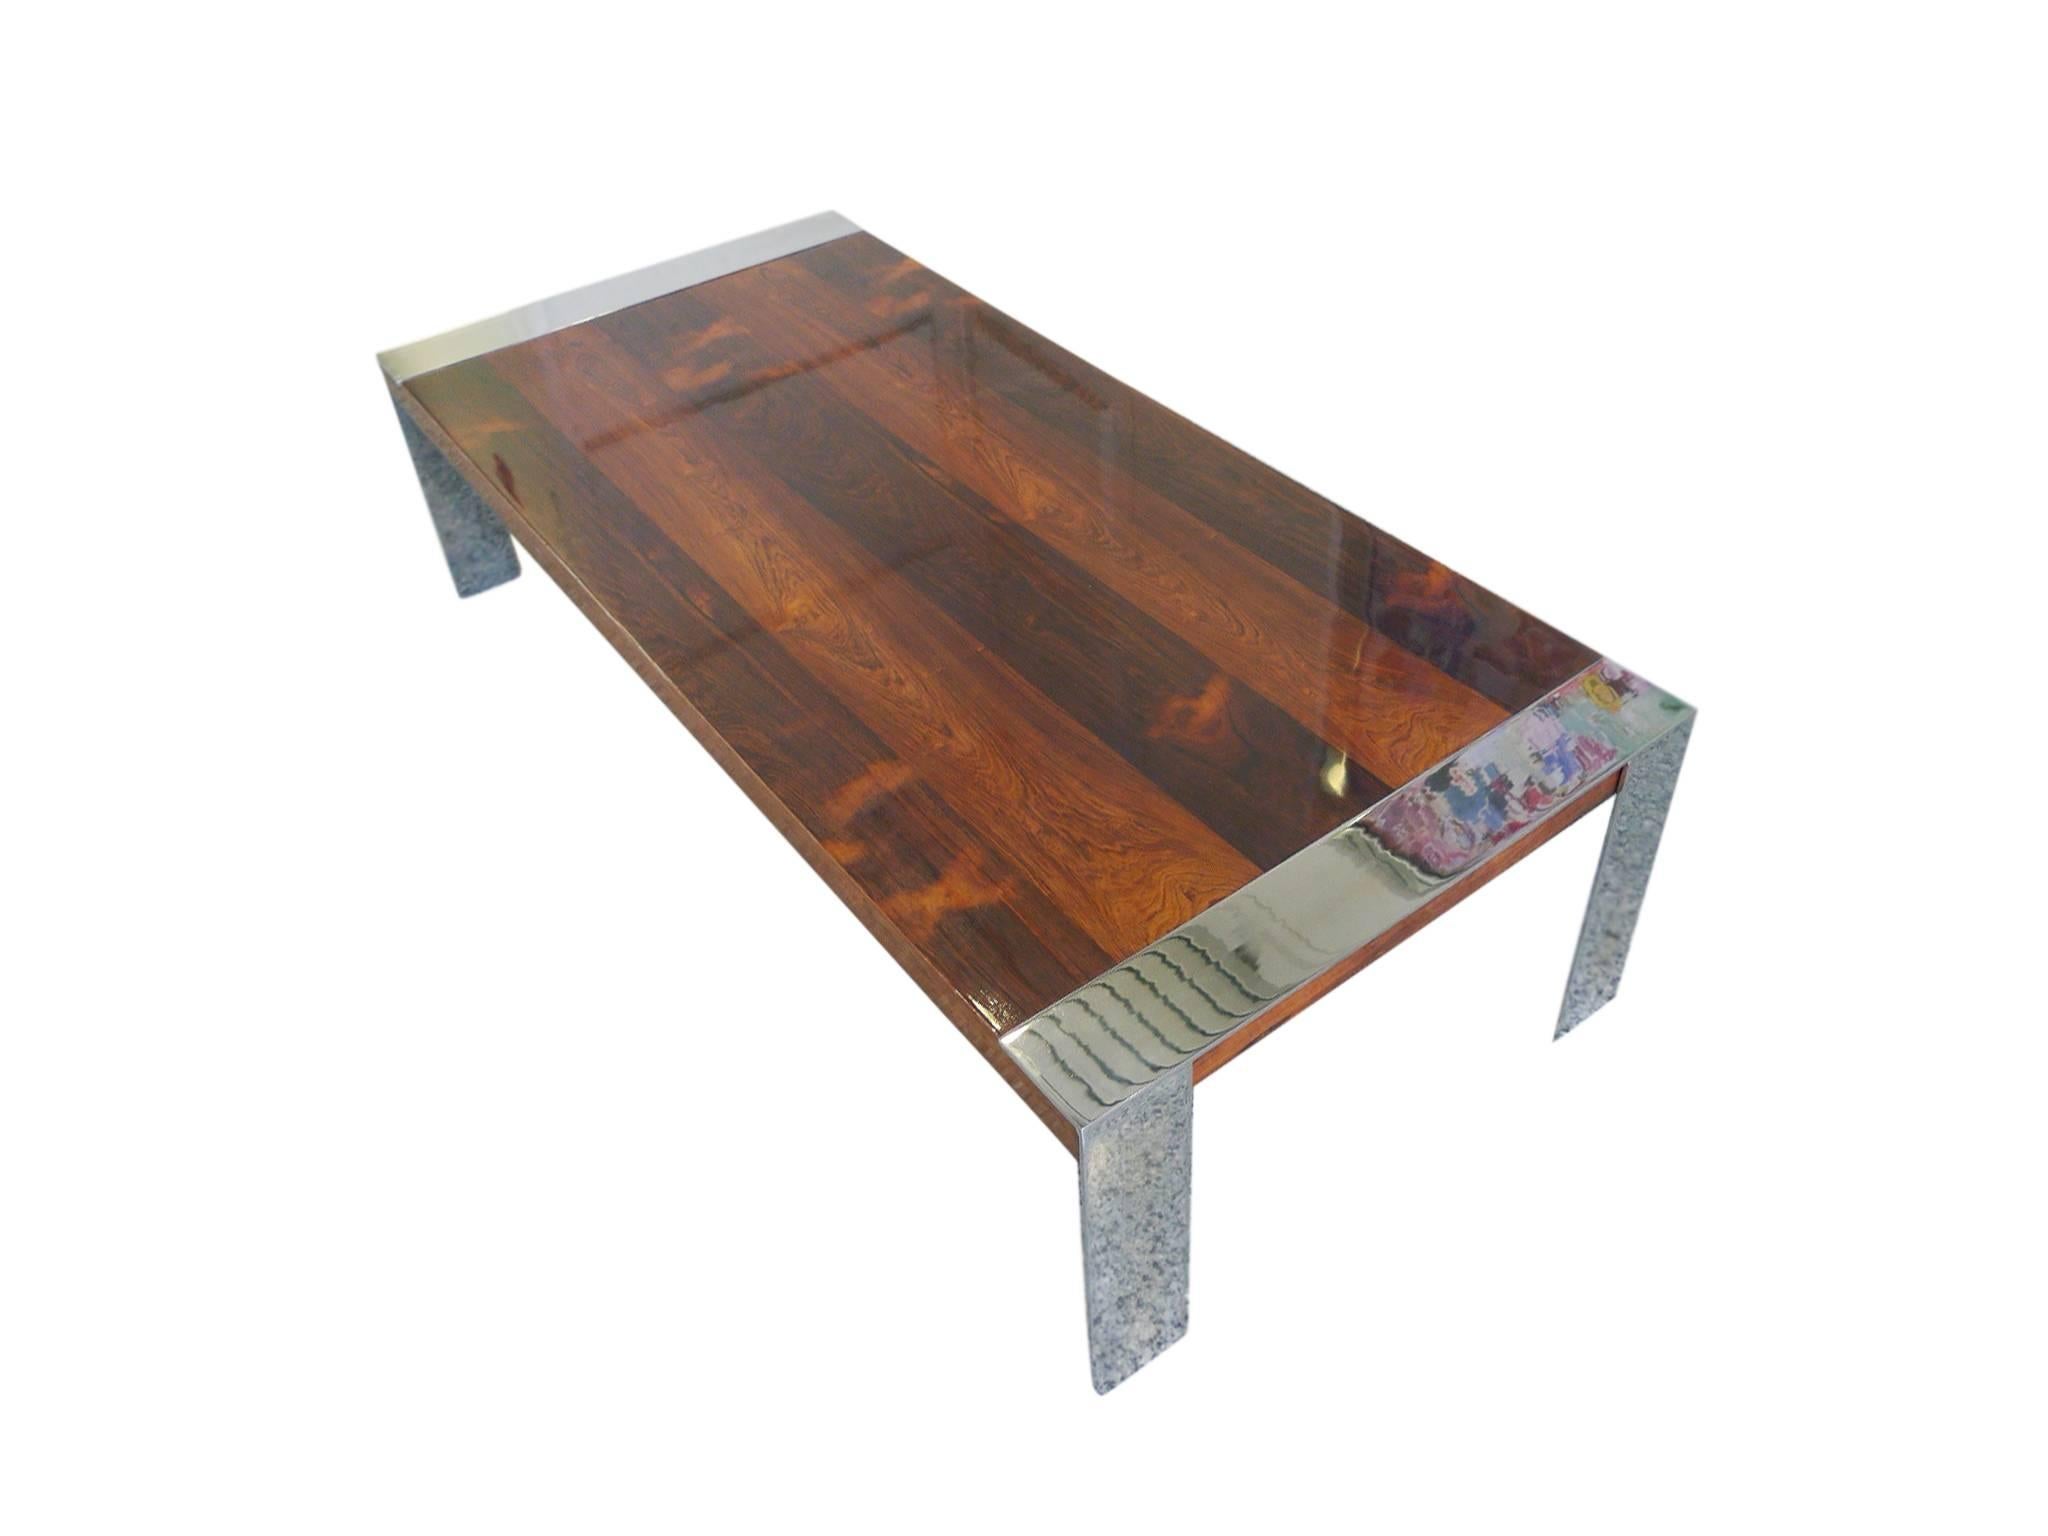 This Milo Baughman style coffee table is comprised of a rosewood tabletop and chrome legs. The rosewood is newly refinished. It has deep red-brown bands that follow the width of the table. The legs are thin, flat bars of chrome that give the